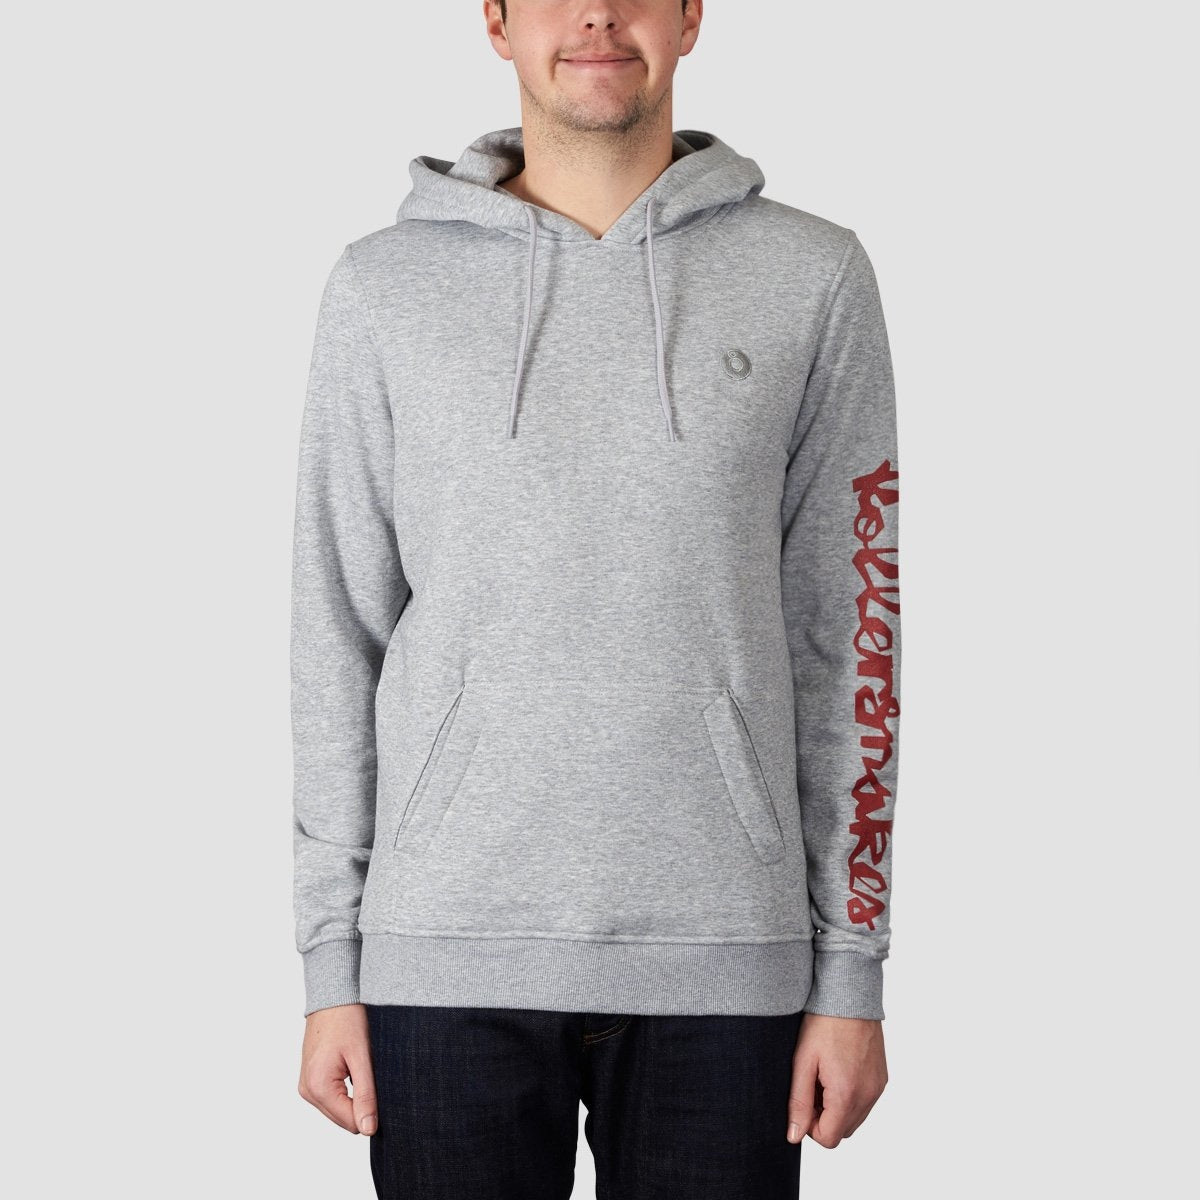 Rollersnakes Chunker Pullover Hood Heather Grey - Clothing